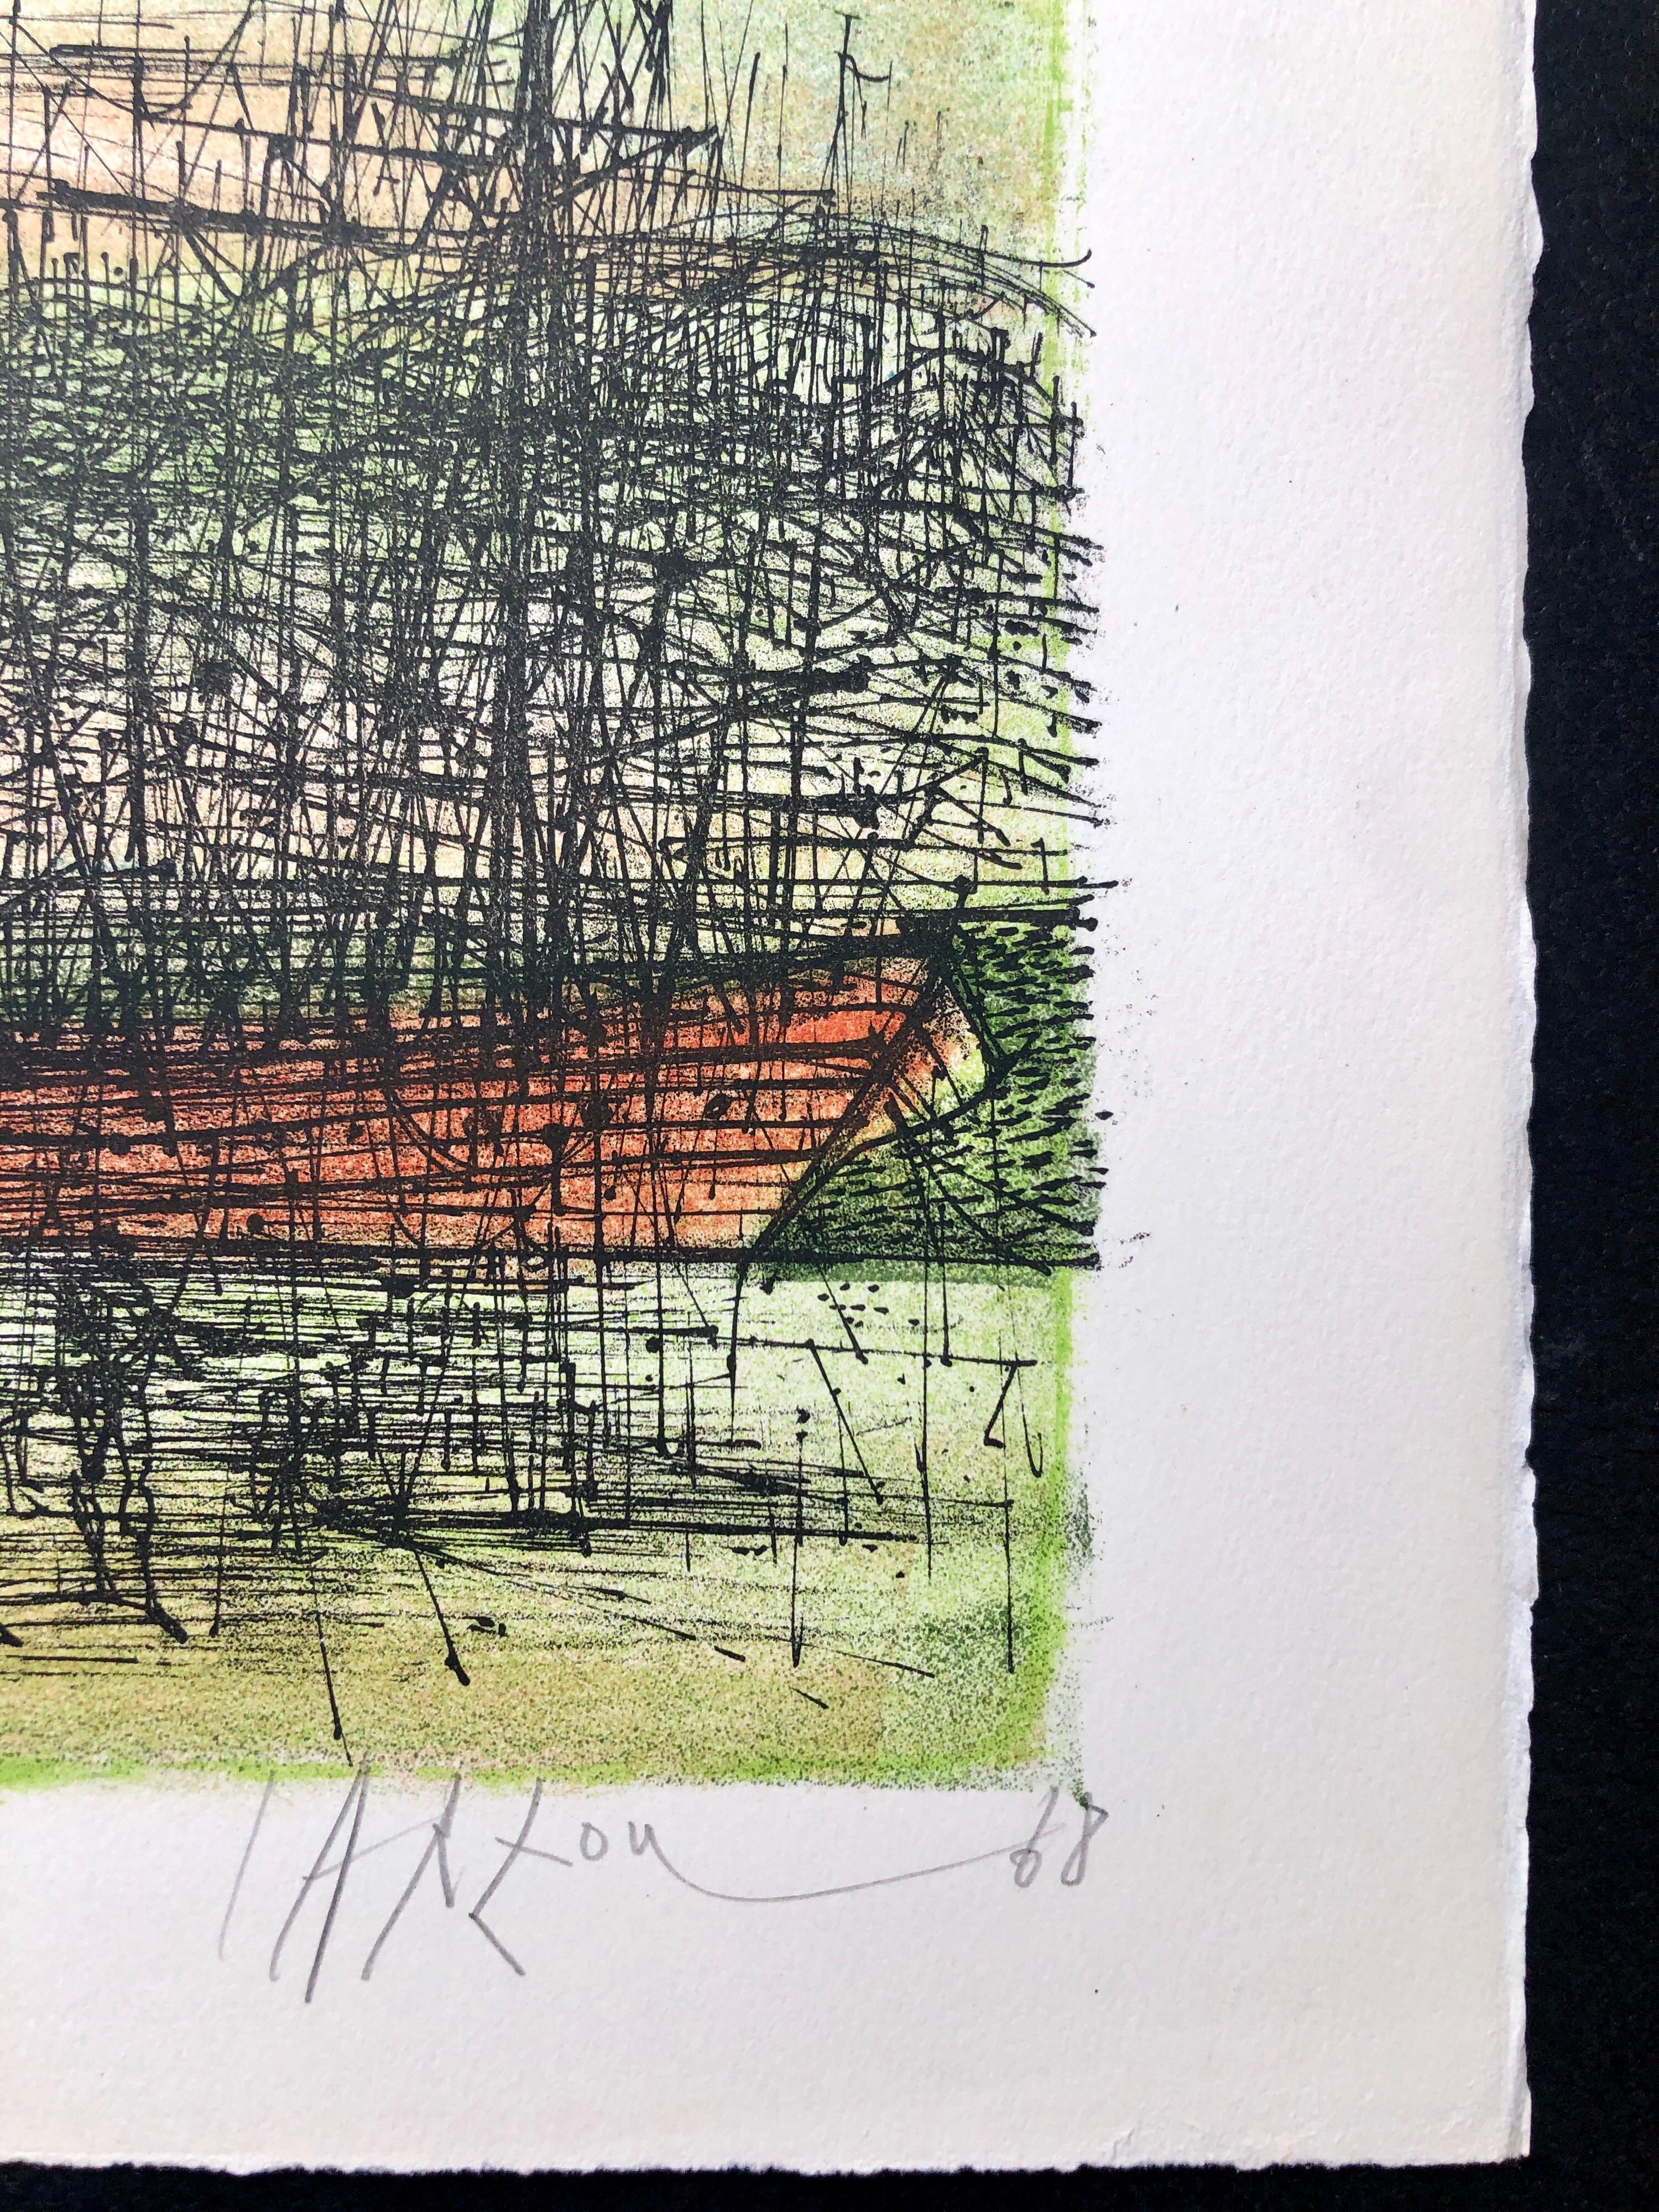 This is a hand signed in pencil, vintage, limited edition lithograph modern art print, printed in Switzerland on Rives French art paper in 1968. in shades of red, orange, green, yellow.
Jean Carzou (Armenian: Ժան Գառզու, 1 January 1907 – 12 August